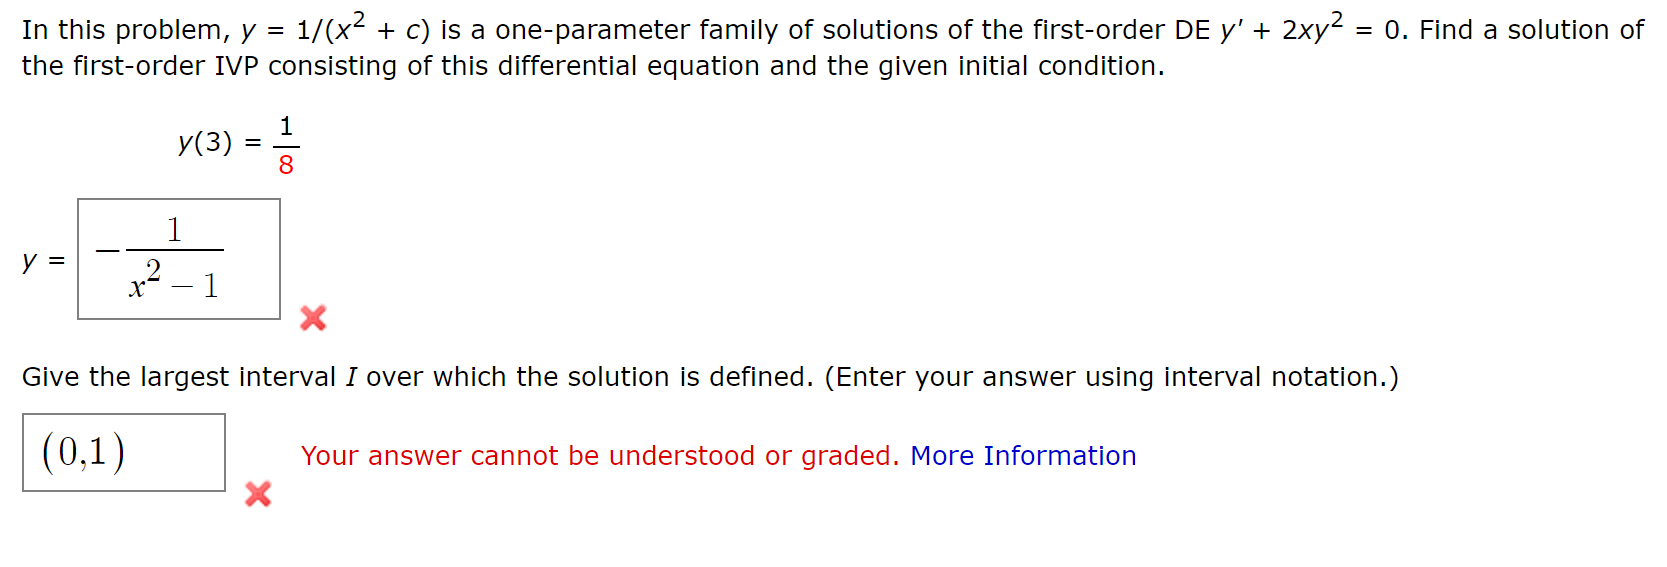 In this problem, y = 1/(x2 + c) is a one-parameter family of solutions of the first-order DE y' + 2xy2 = 0. Find a solution of
the first-order IVP consisting of this differential equation and the given initial condition.
У(3)
x² – 1
Give the largest interval I over which the solution is defined. (Enter your answer using interval notation.)
(0,1)
Your answer cannot be understood or graded. More Information
